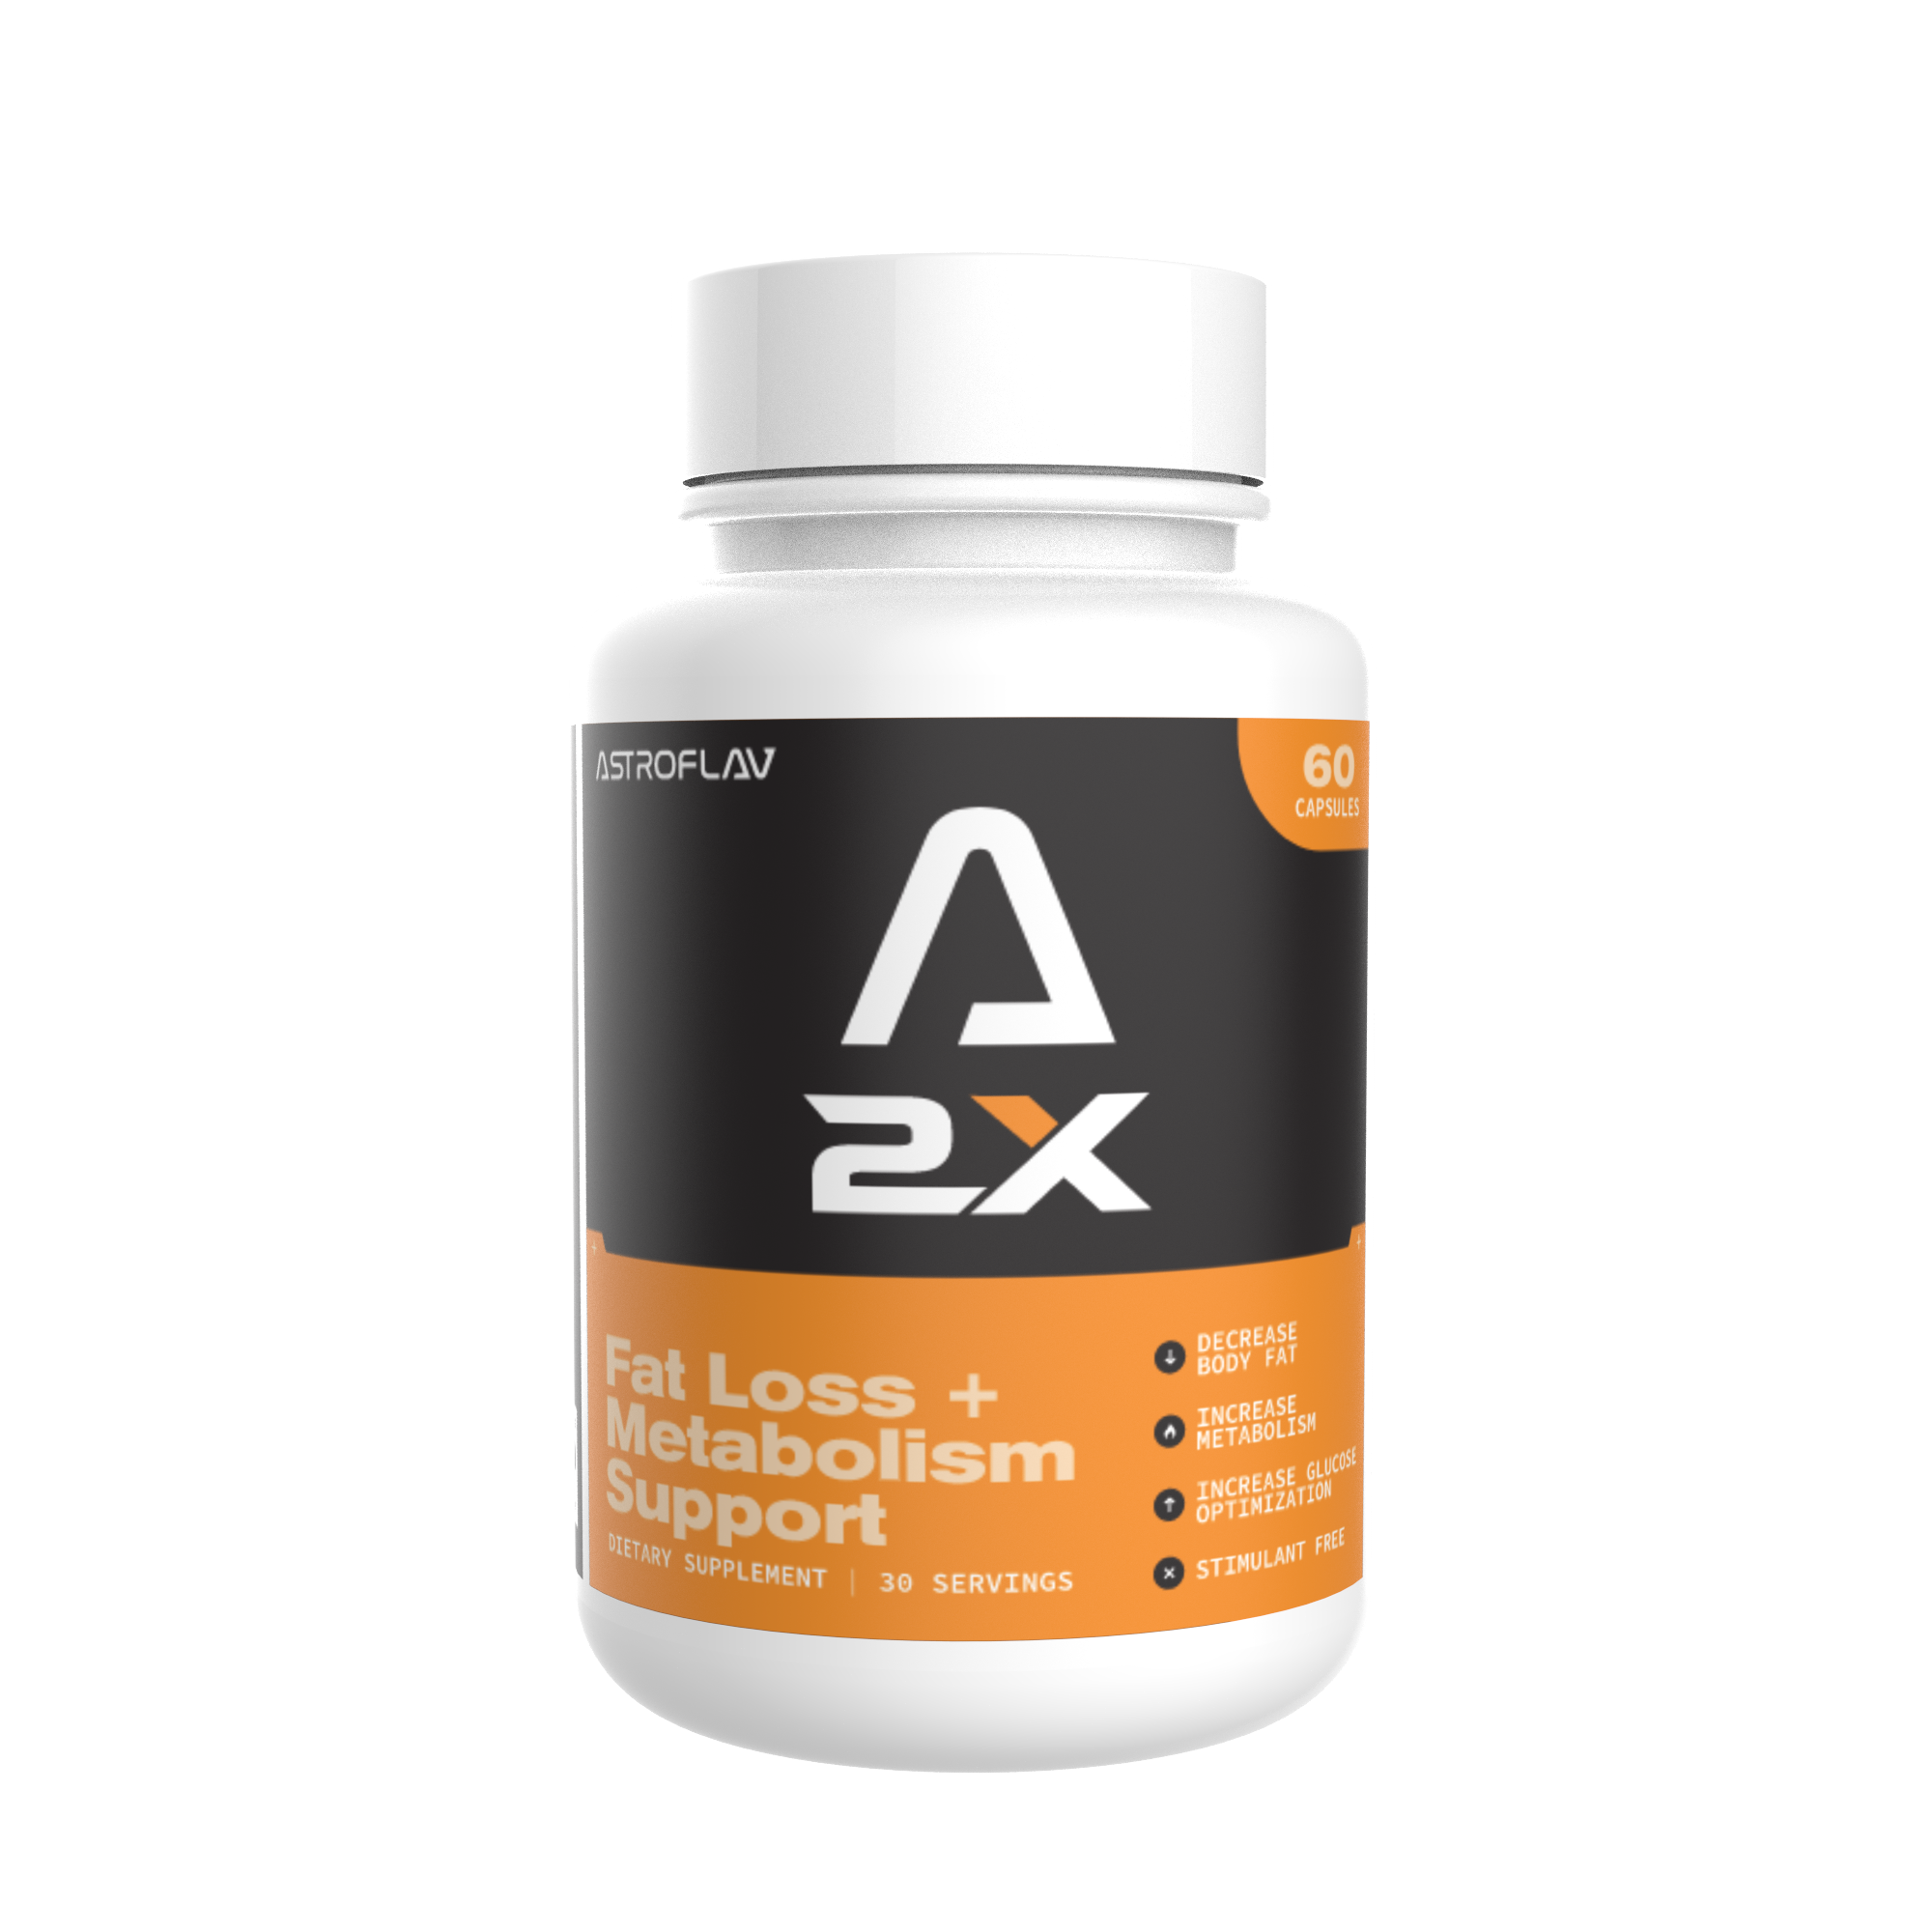 2X | Fat Loss + Metabolism Support